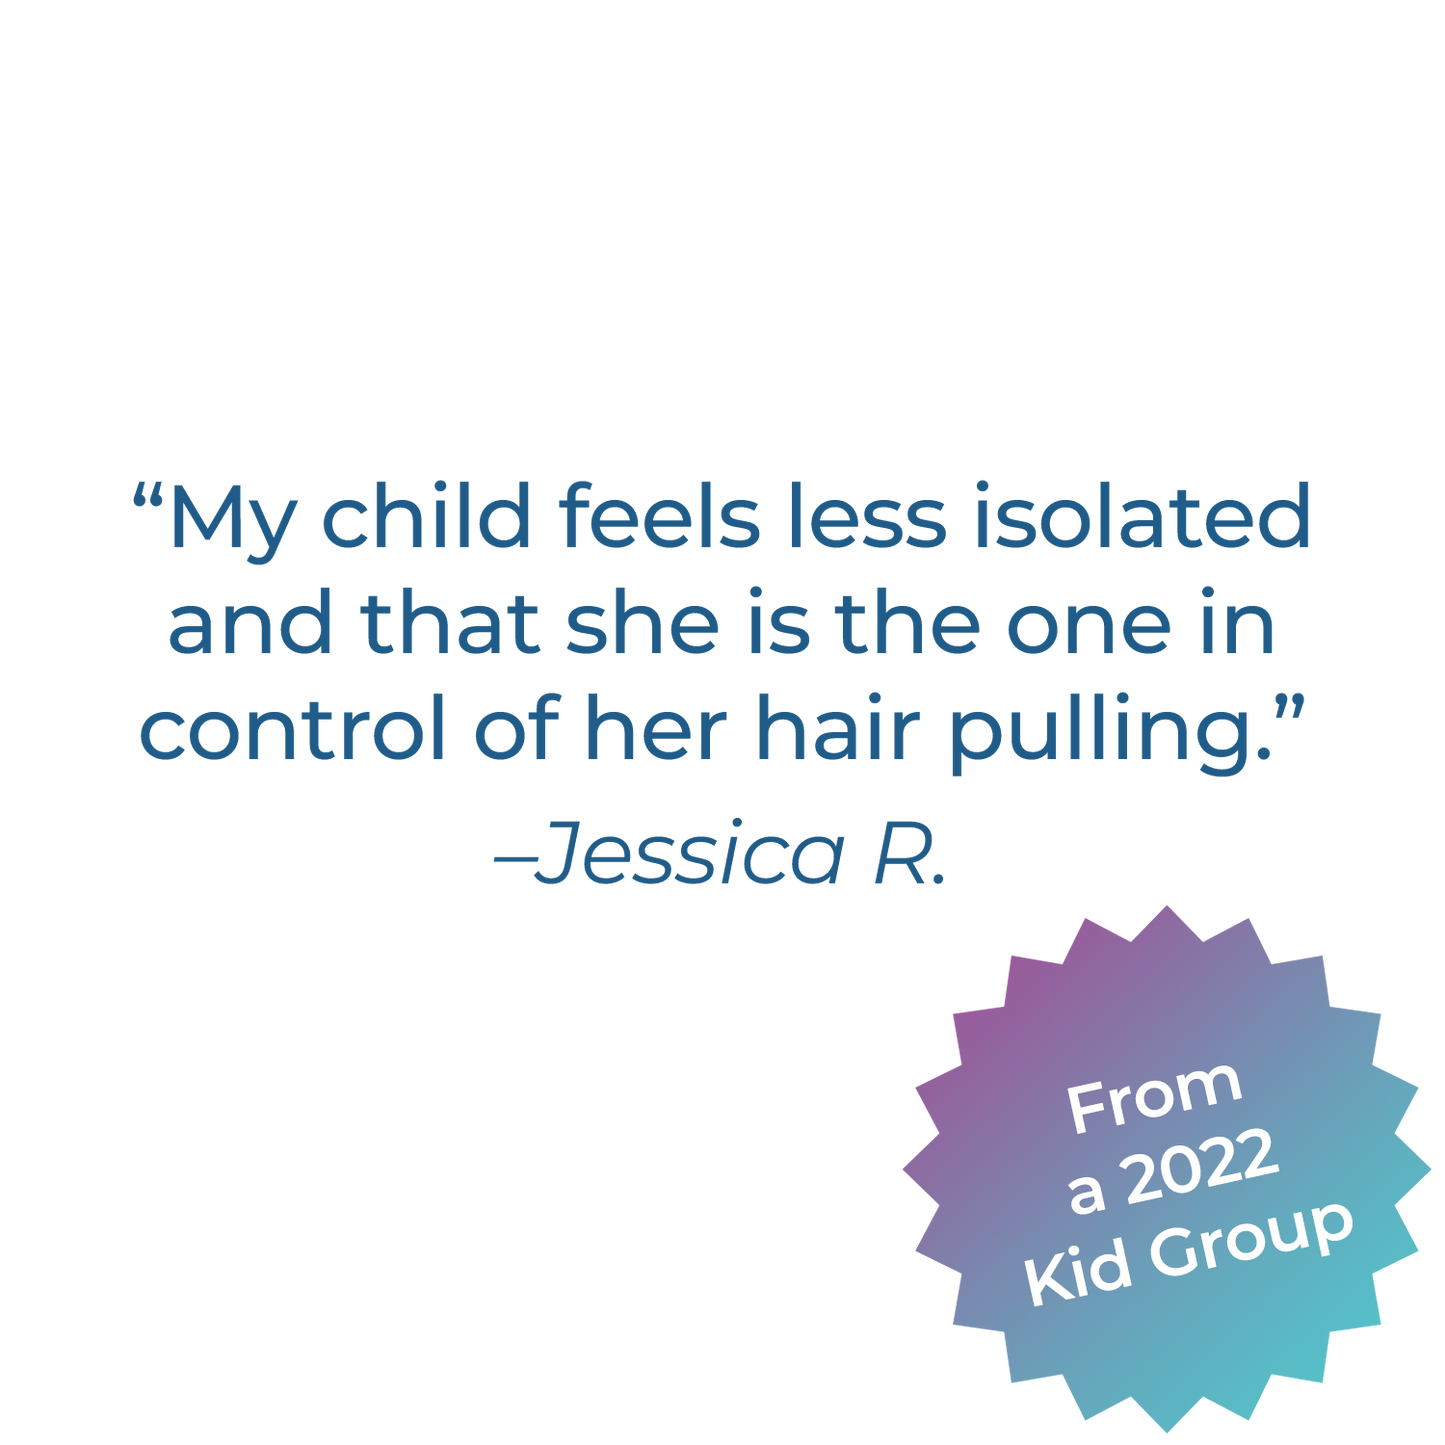 A quote from jessica r that says her child feels less isolated and that she is the only one in control of 12.17.23 Kid Hangout pulling.